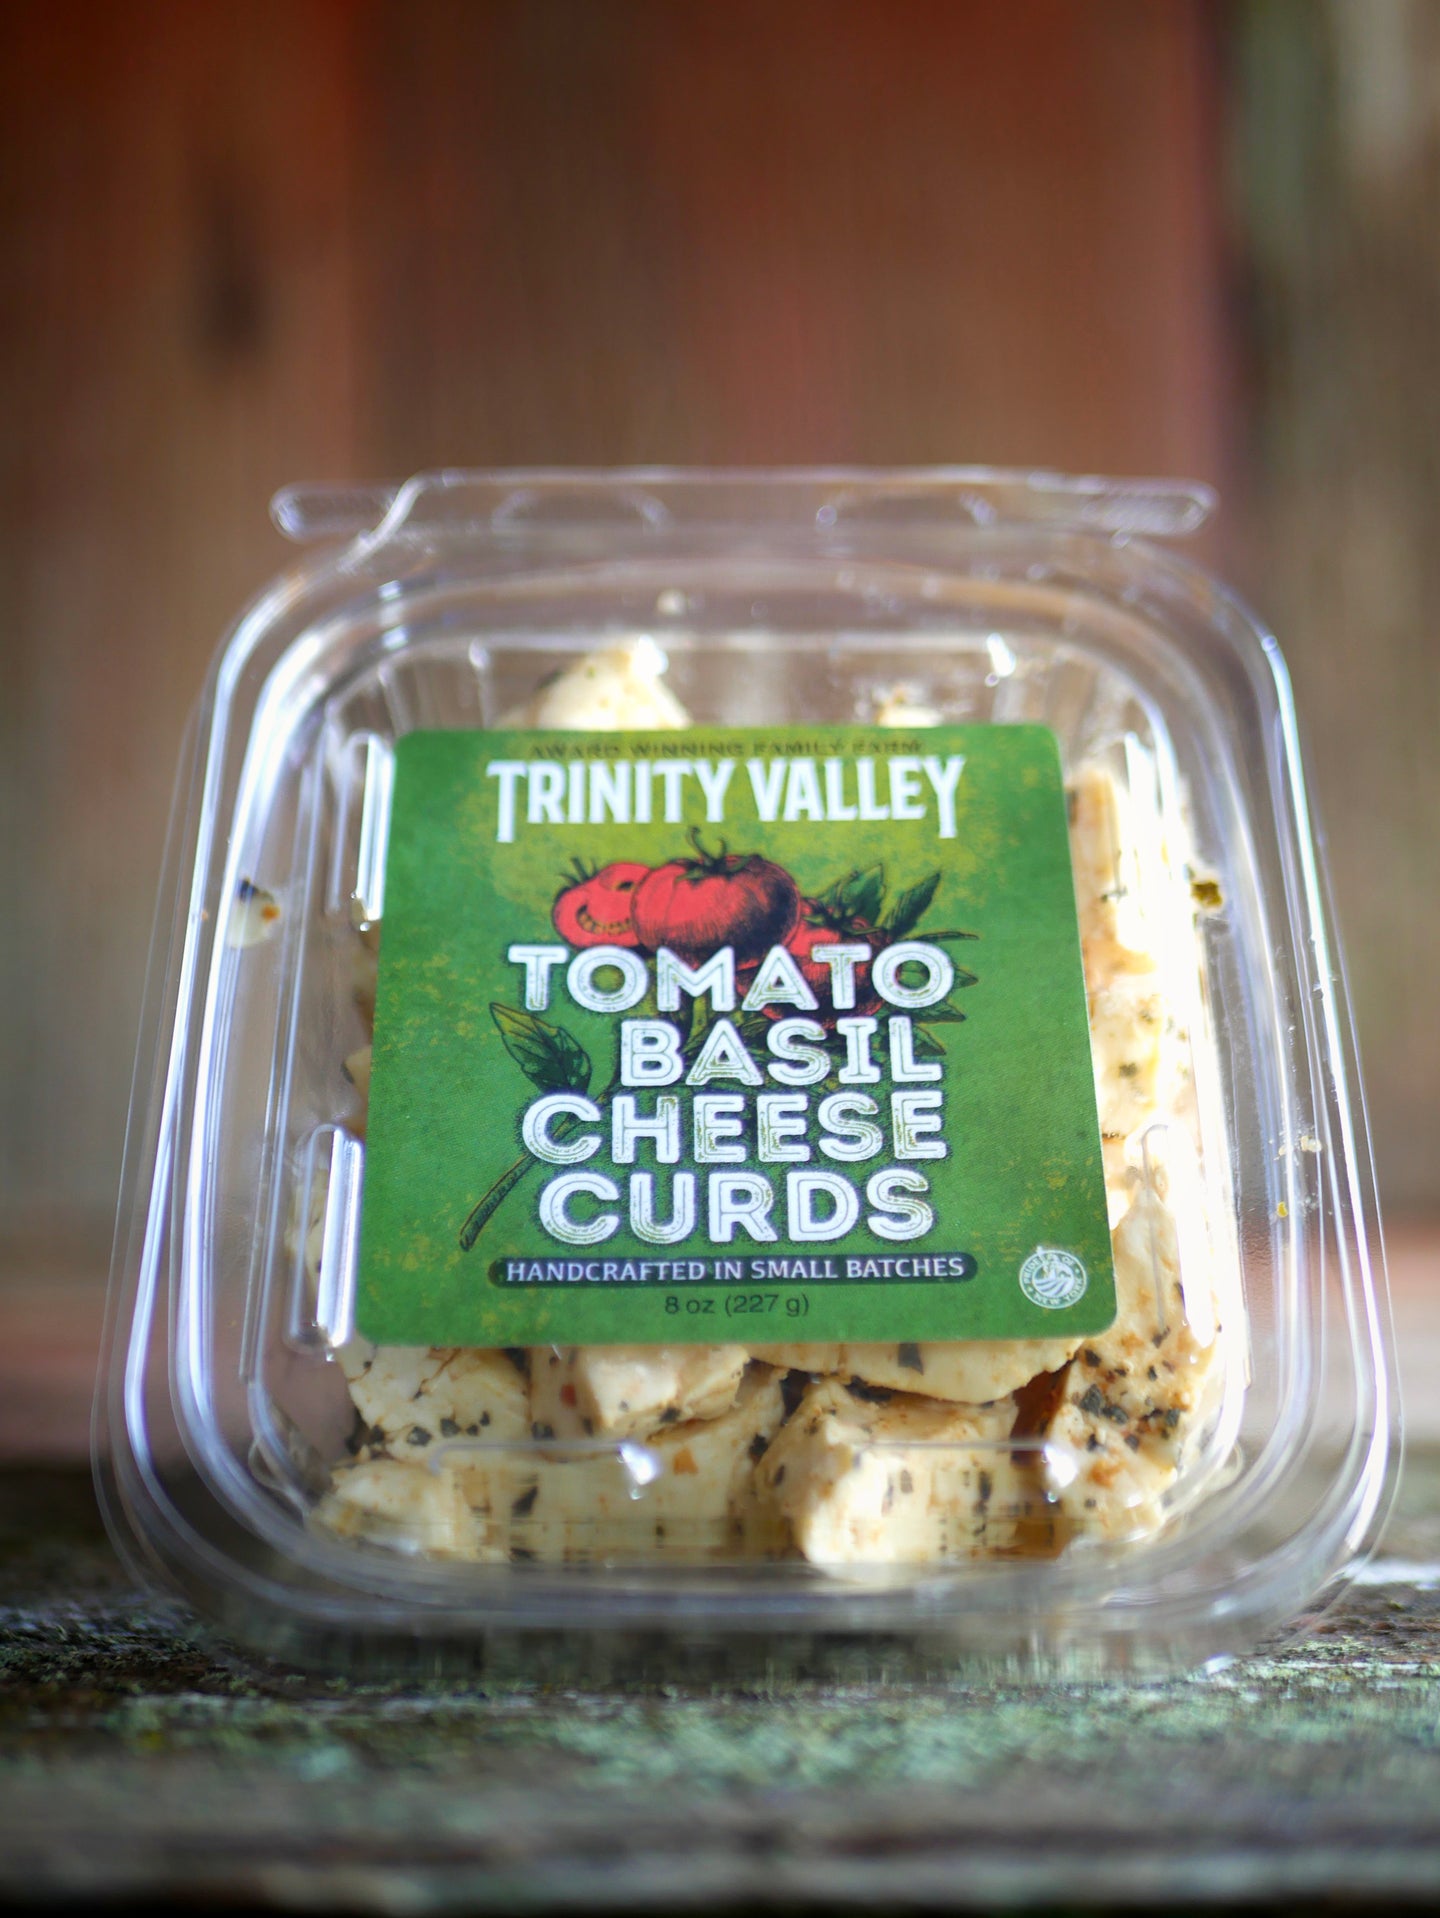 Trinity Valley Handcrafted Artisan Tomato & Basil Cheese Curd